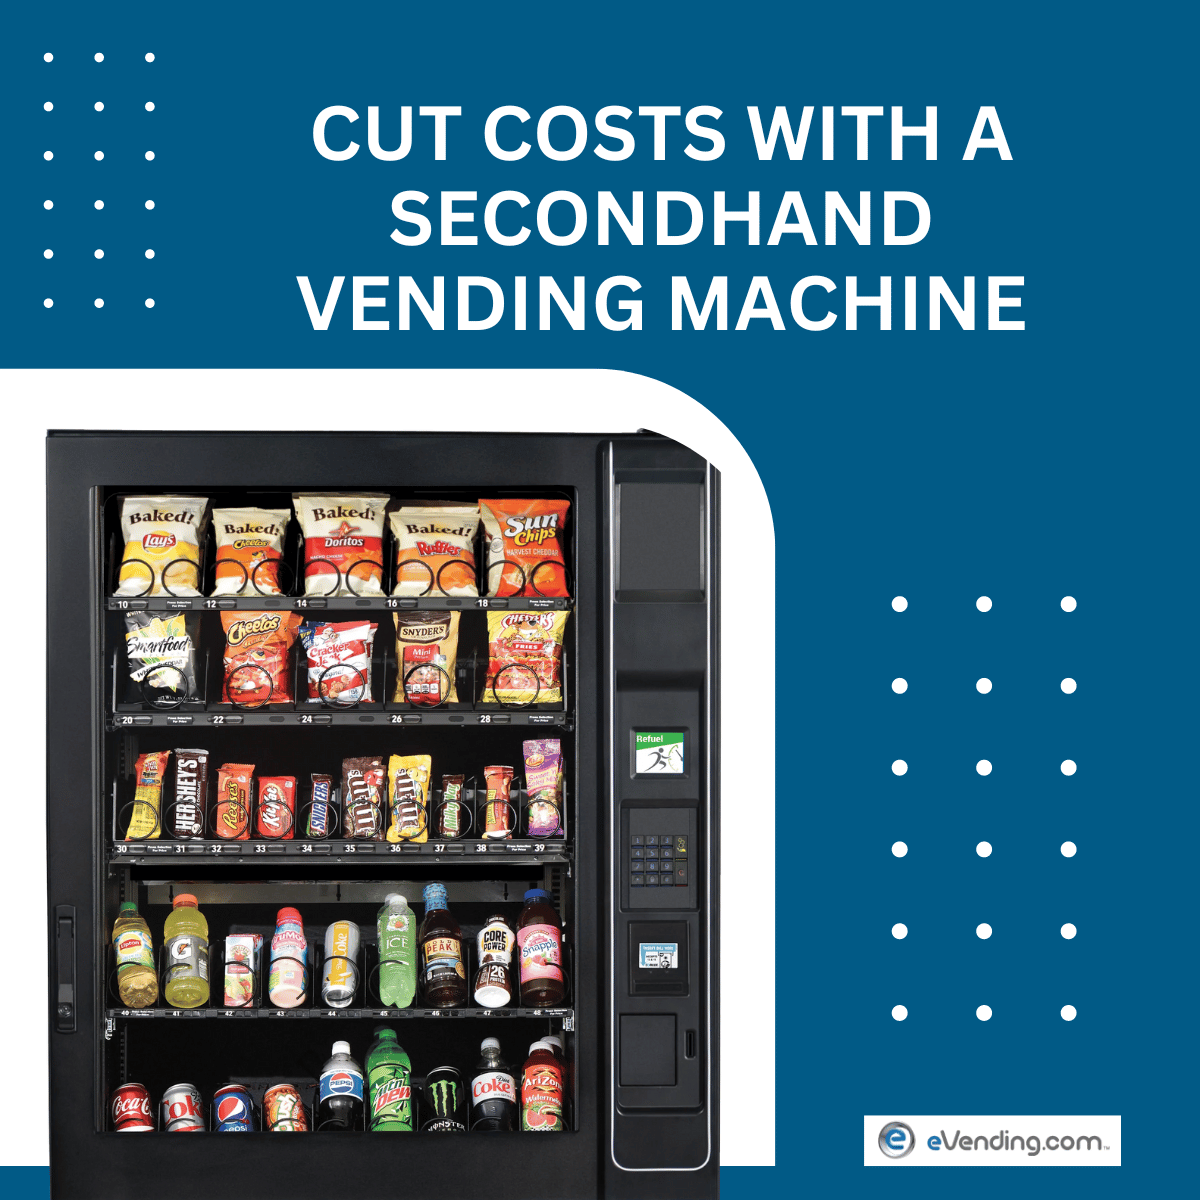 DO YOU REALLY NEED TO SPEND THE MONEY ON A BRAND NEW VENDING MACHINE?